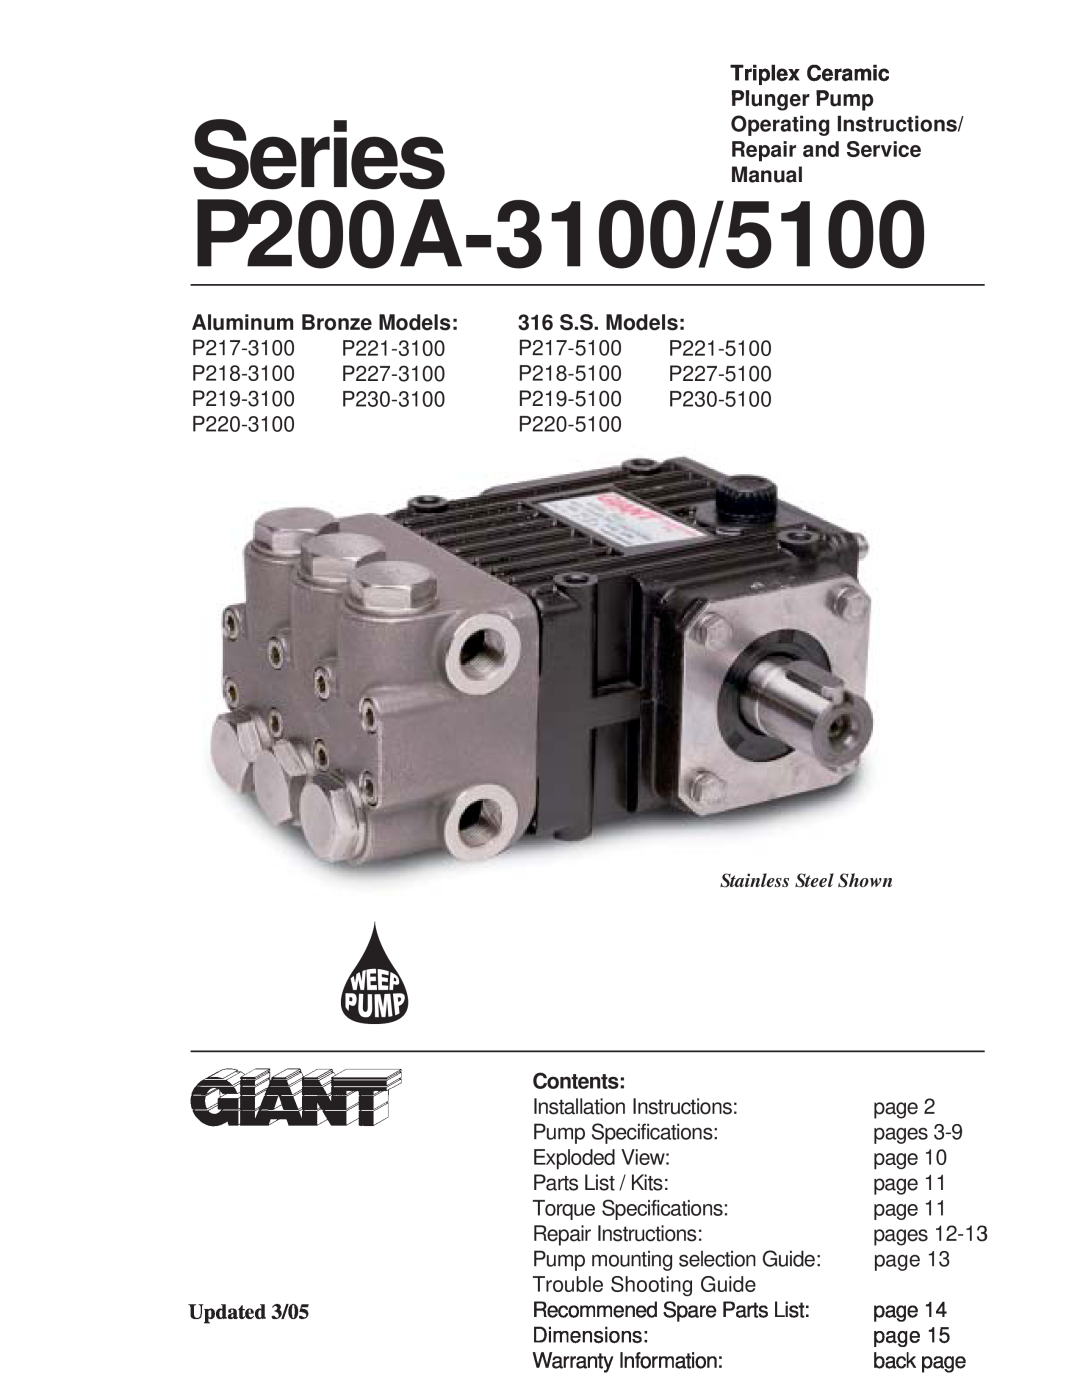 Giant P200A-5100 installation instructions Triplex Ceramic Plunger Pump, Operating Instructions Series Repair and Service 